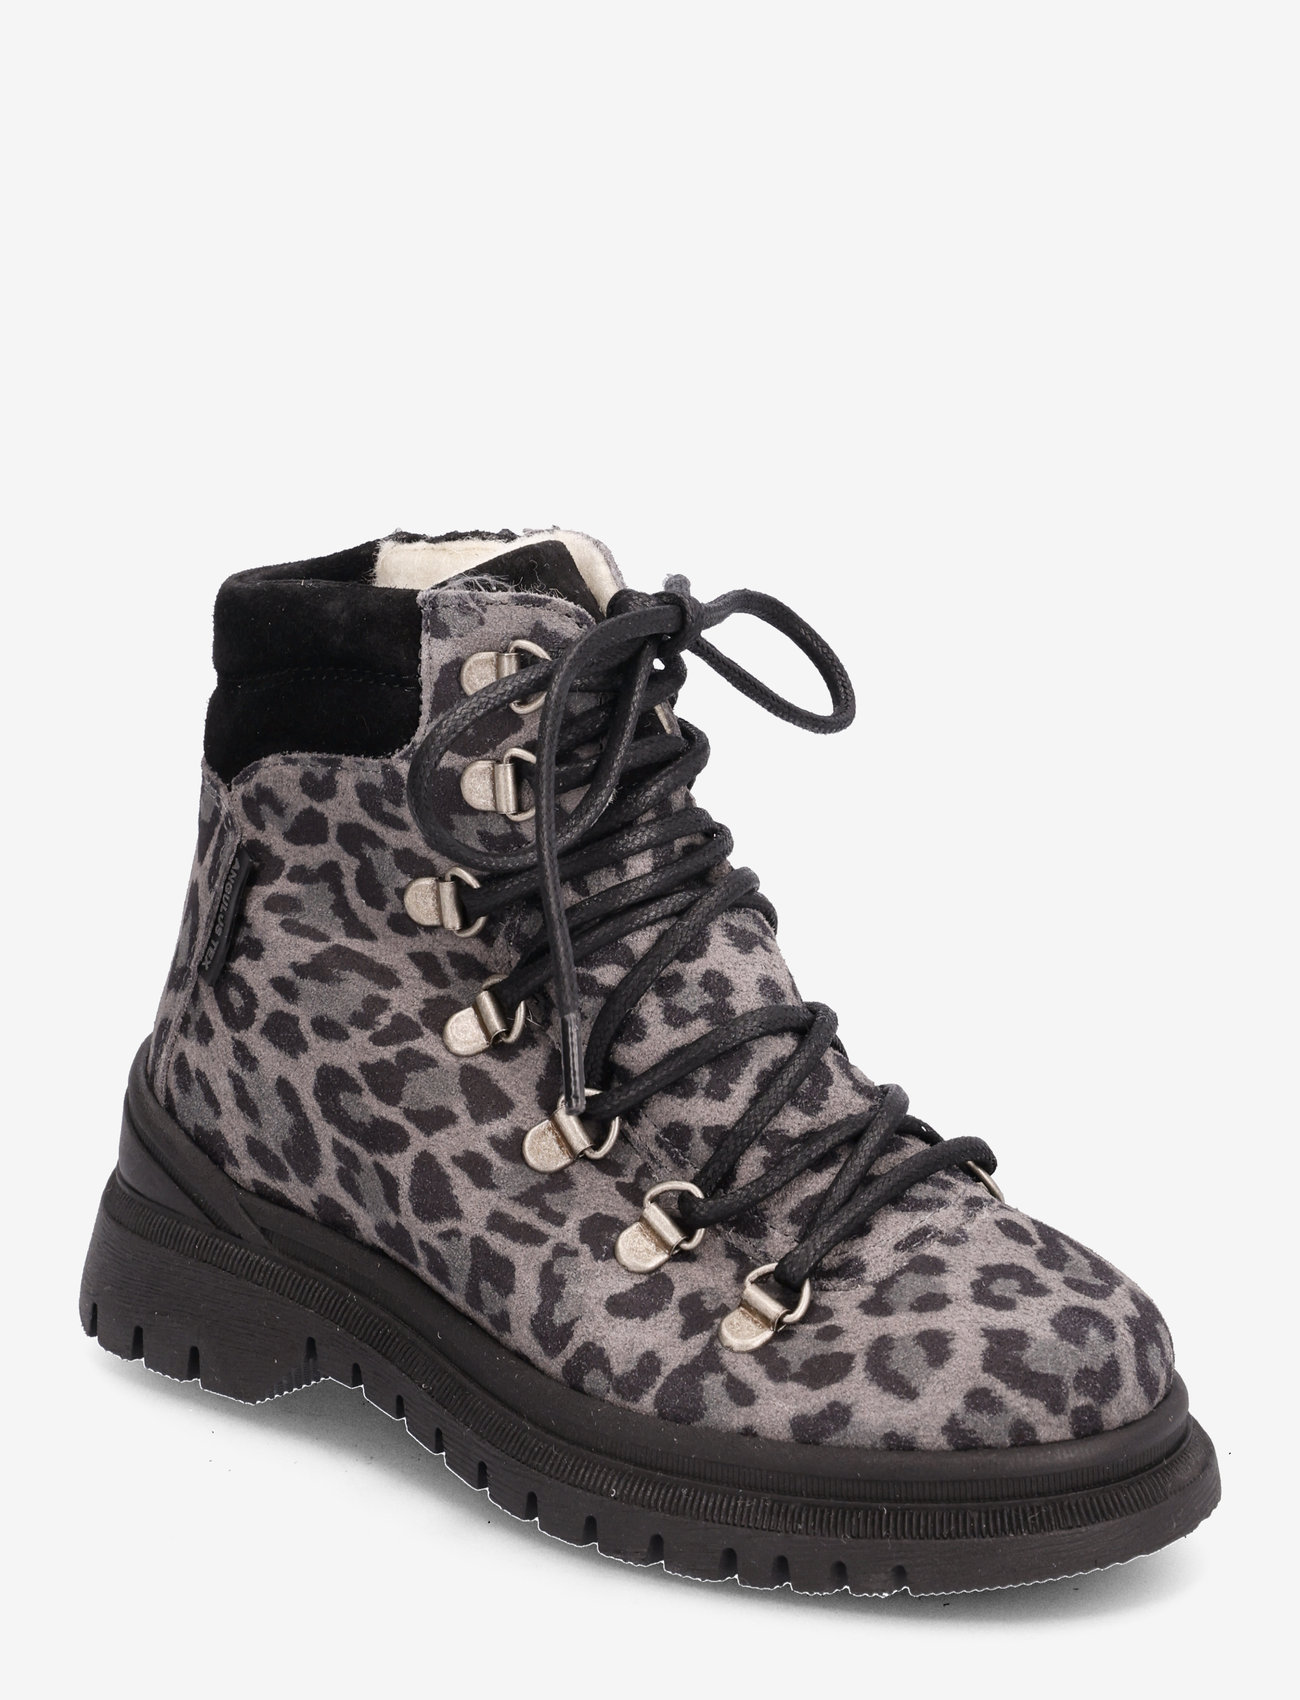 ANGULUS - Boots - flat - with lace and zip - børn - 1750/1163 gray leopard/black - 0